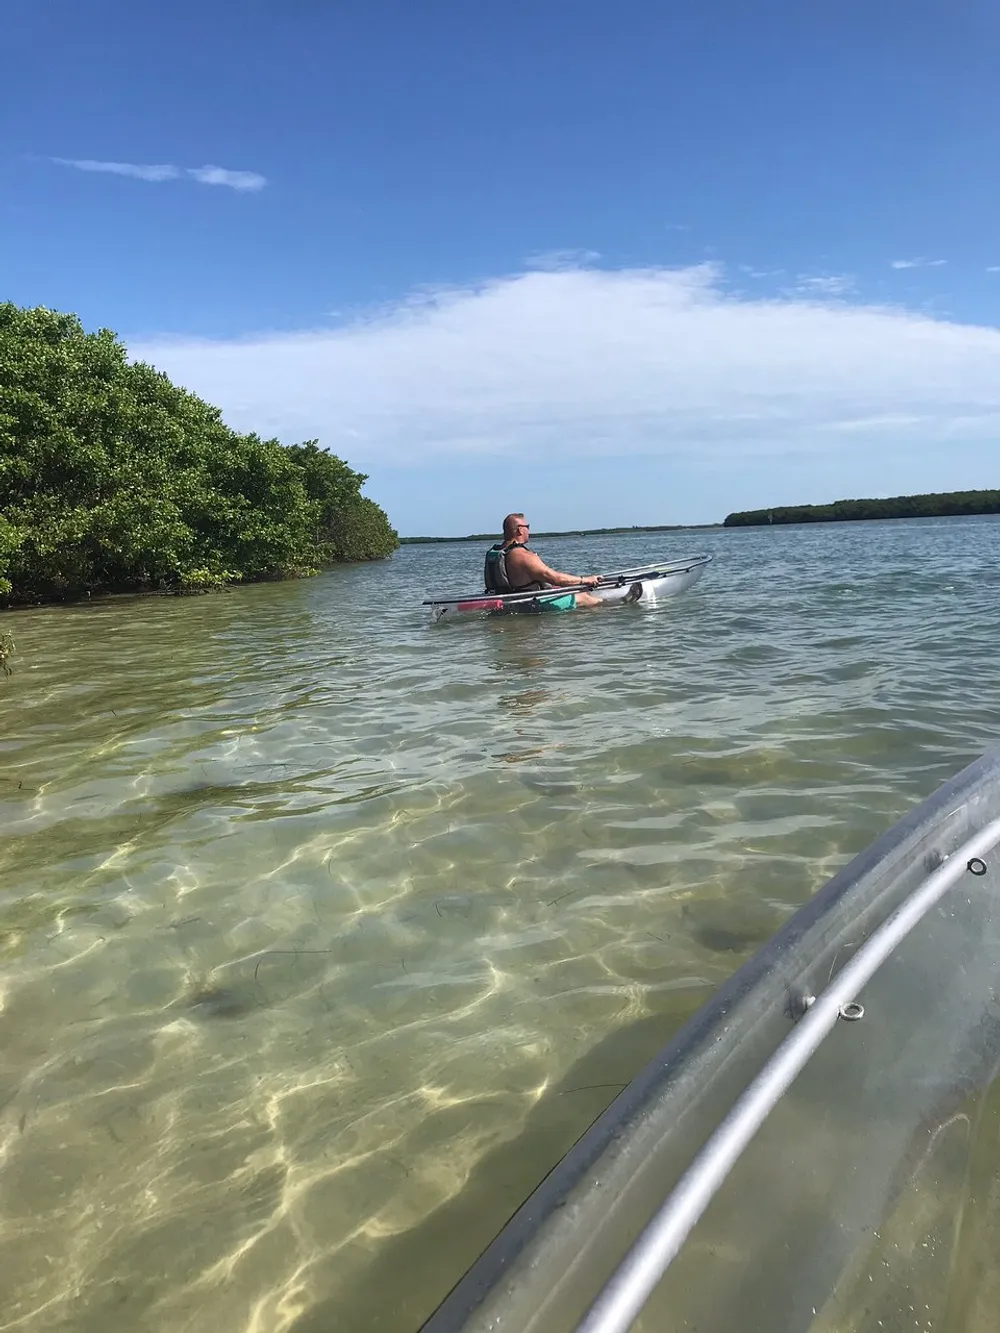 A person in a kayak is paddling through clear shallow waters near a cluster of mangroves